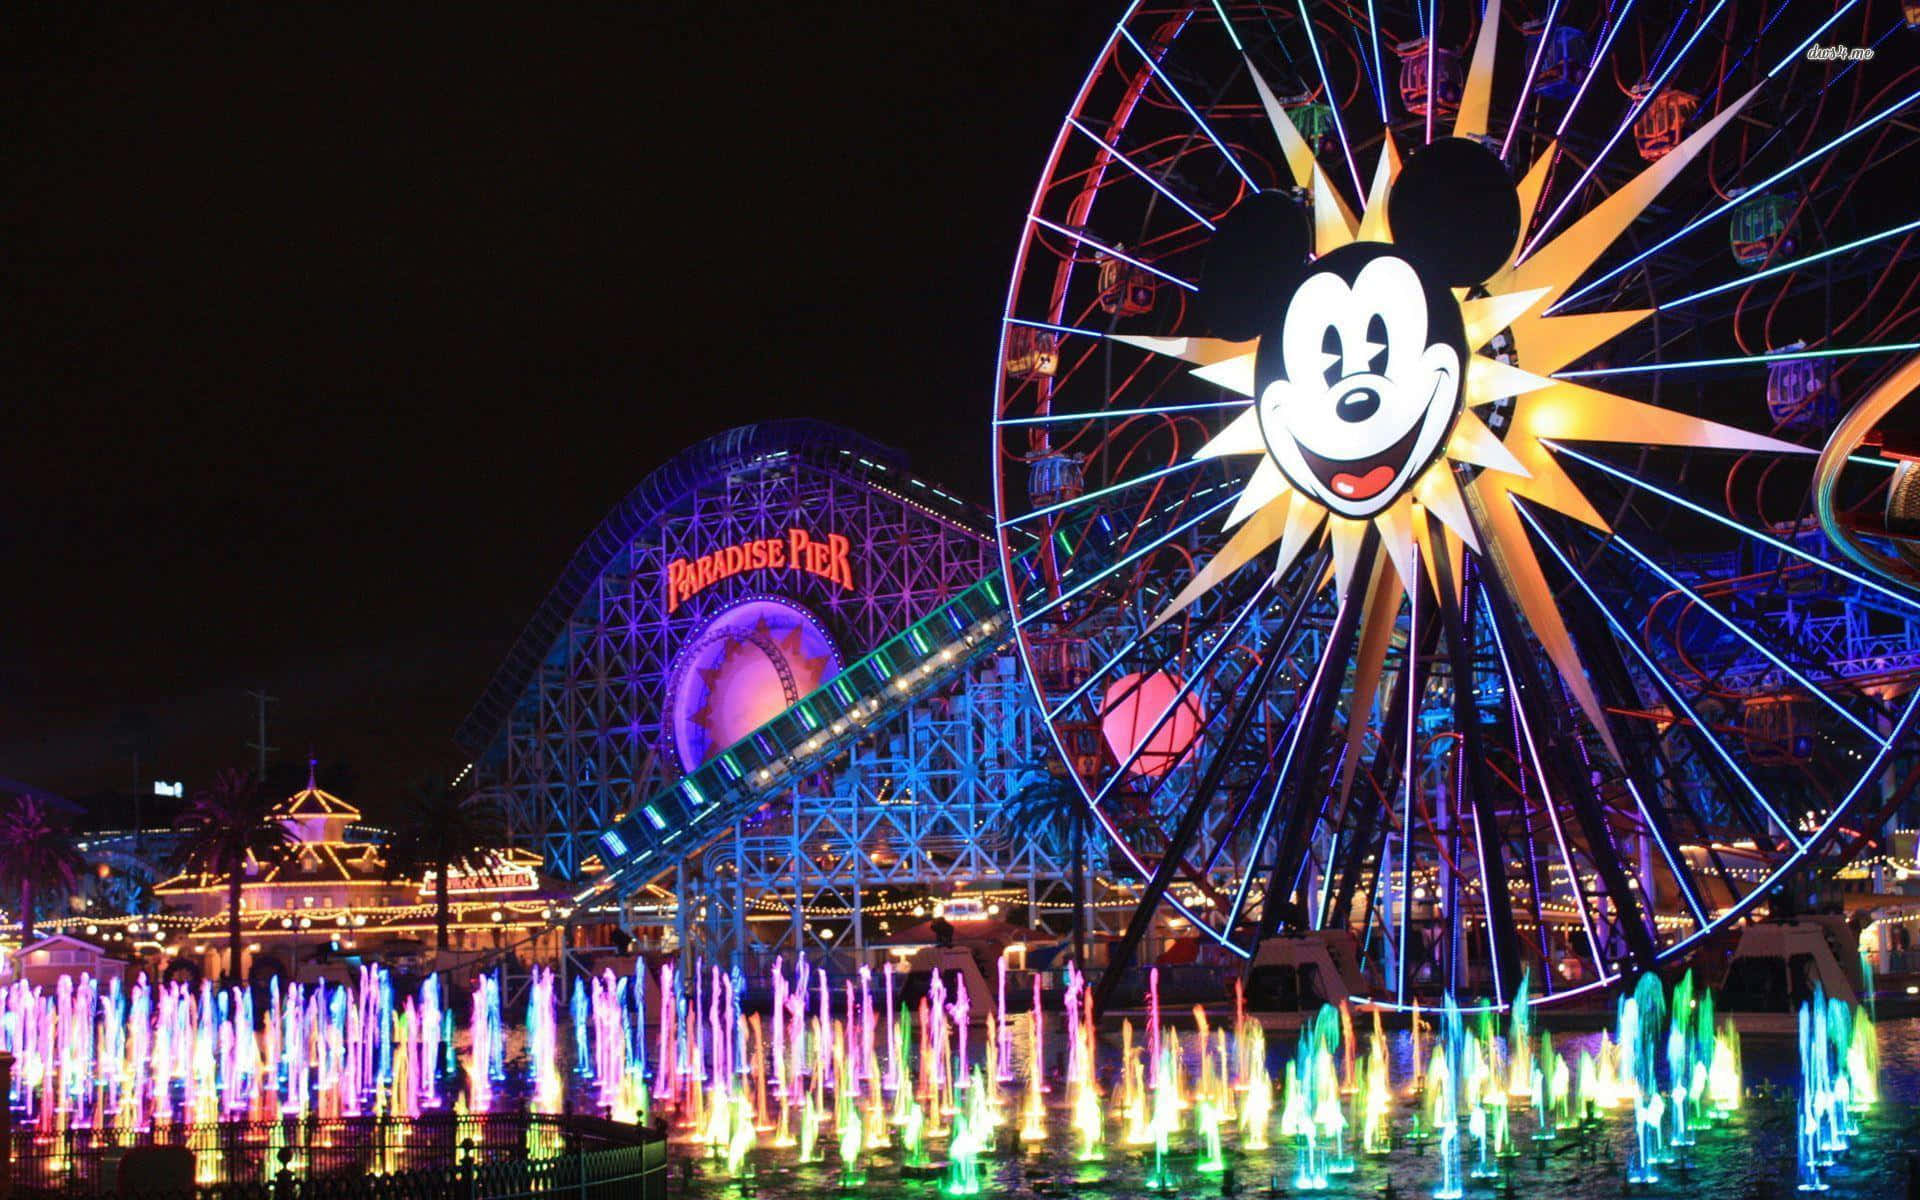 "Discover the Magical World of Disneyland"